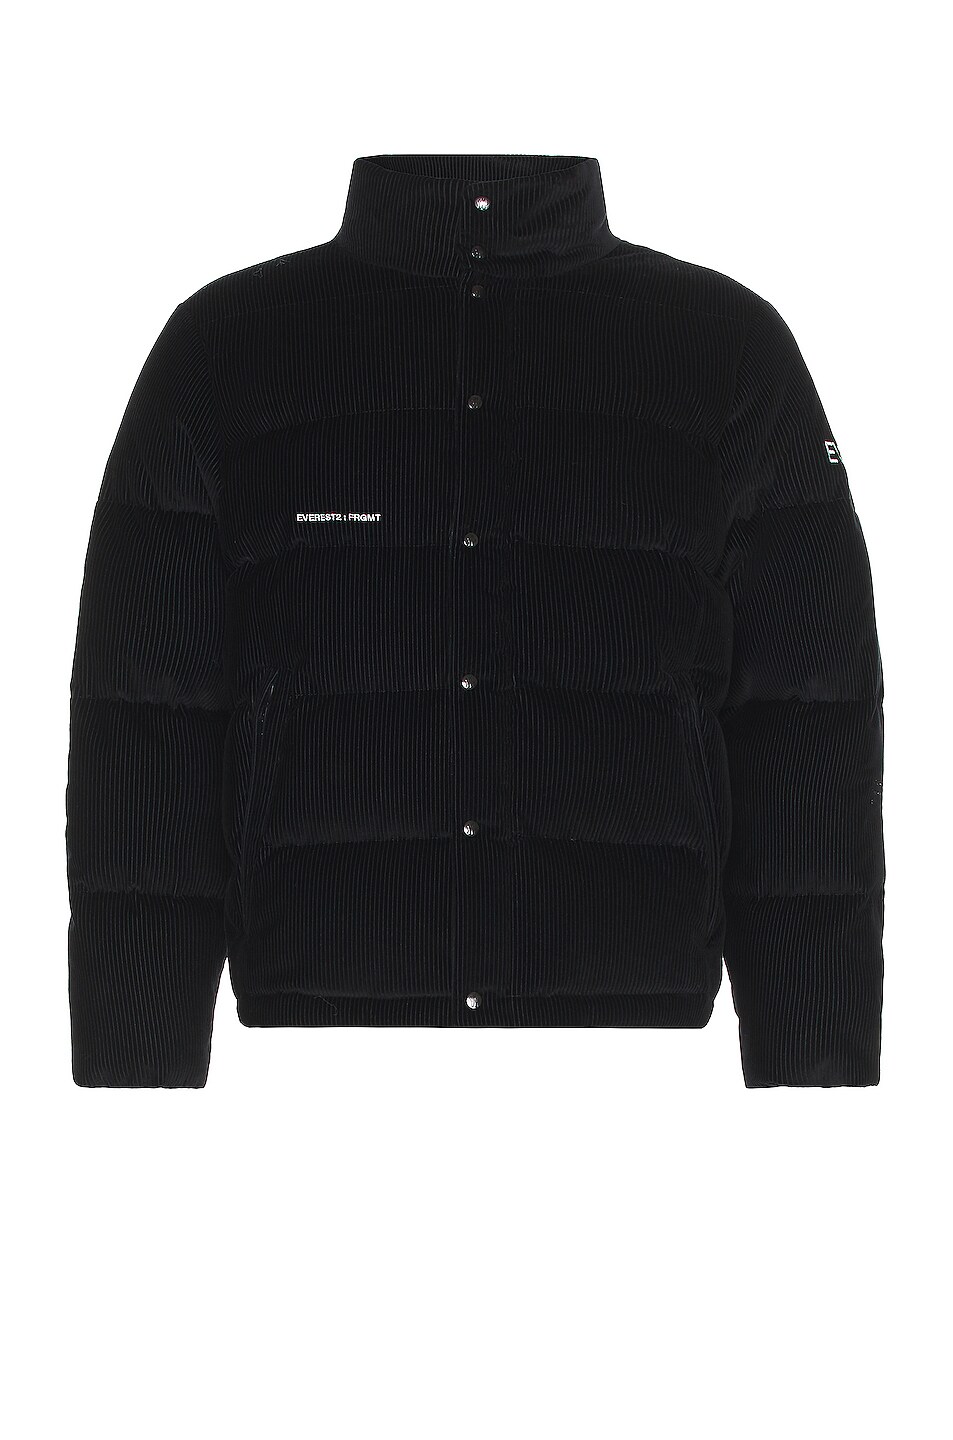 Image 1 of Moncler Genius x Fragment Donnie Jacket in Black